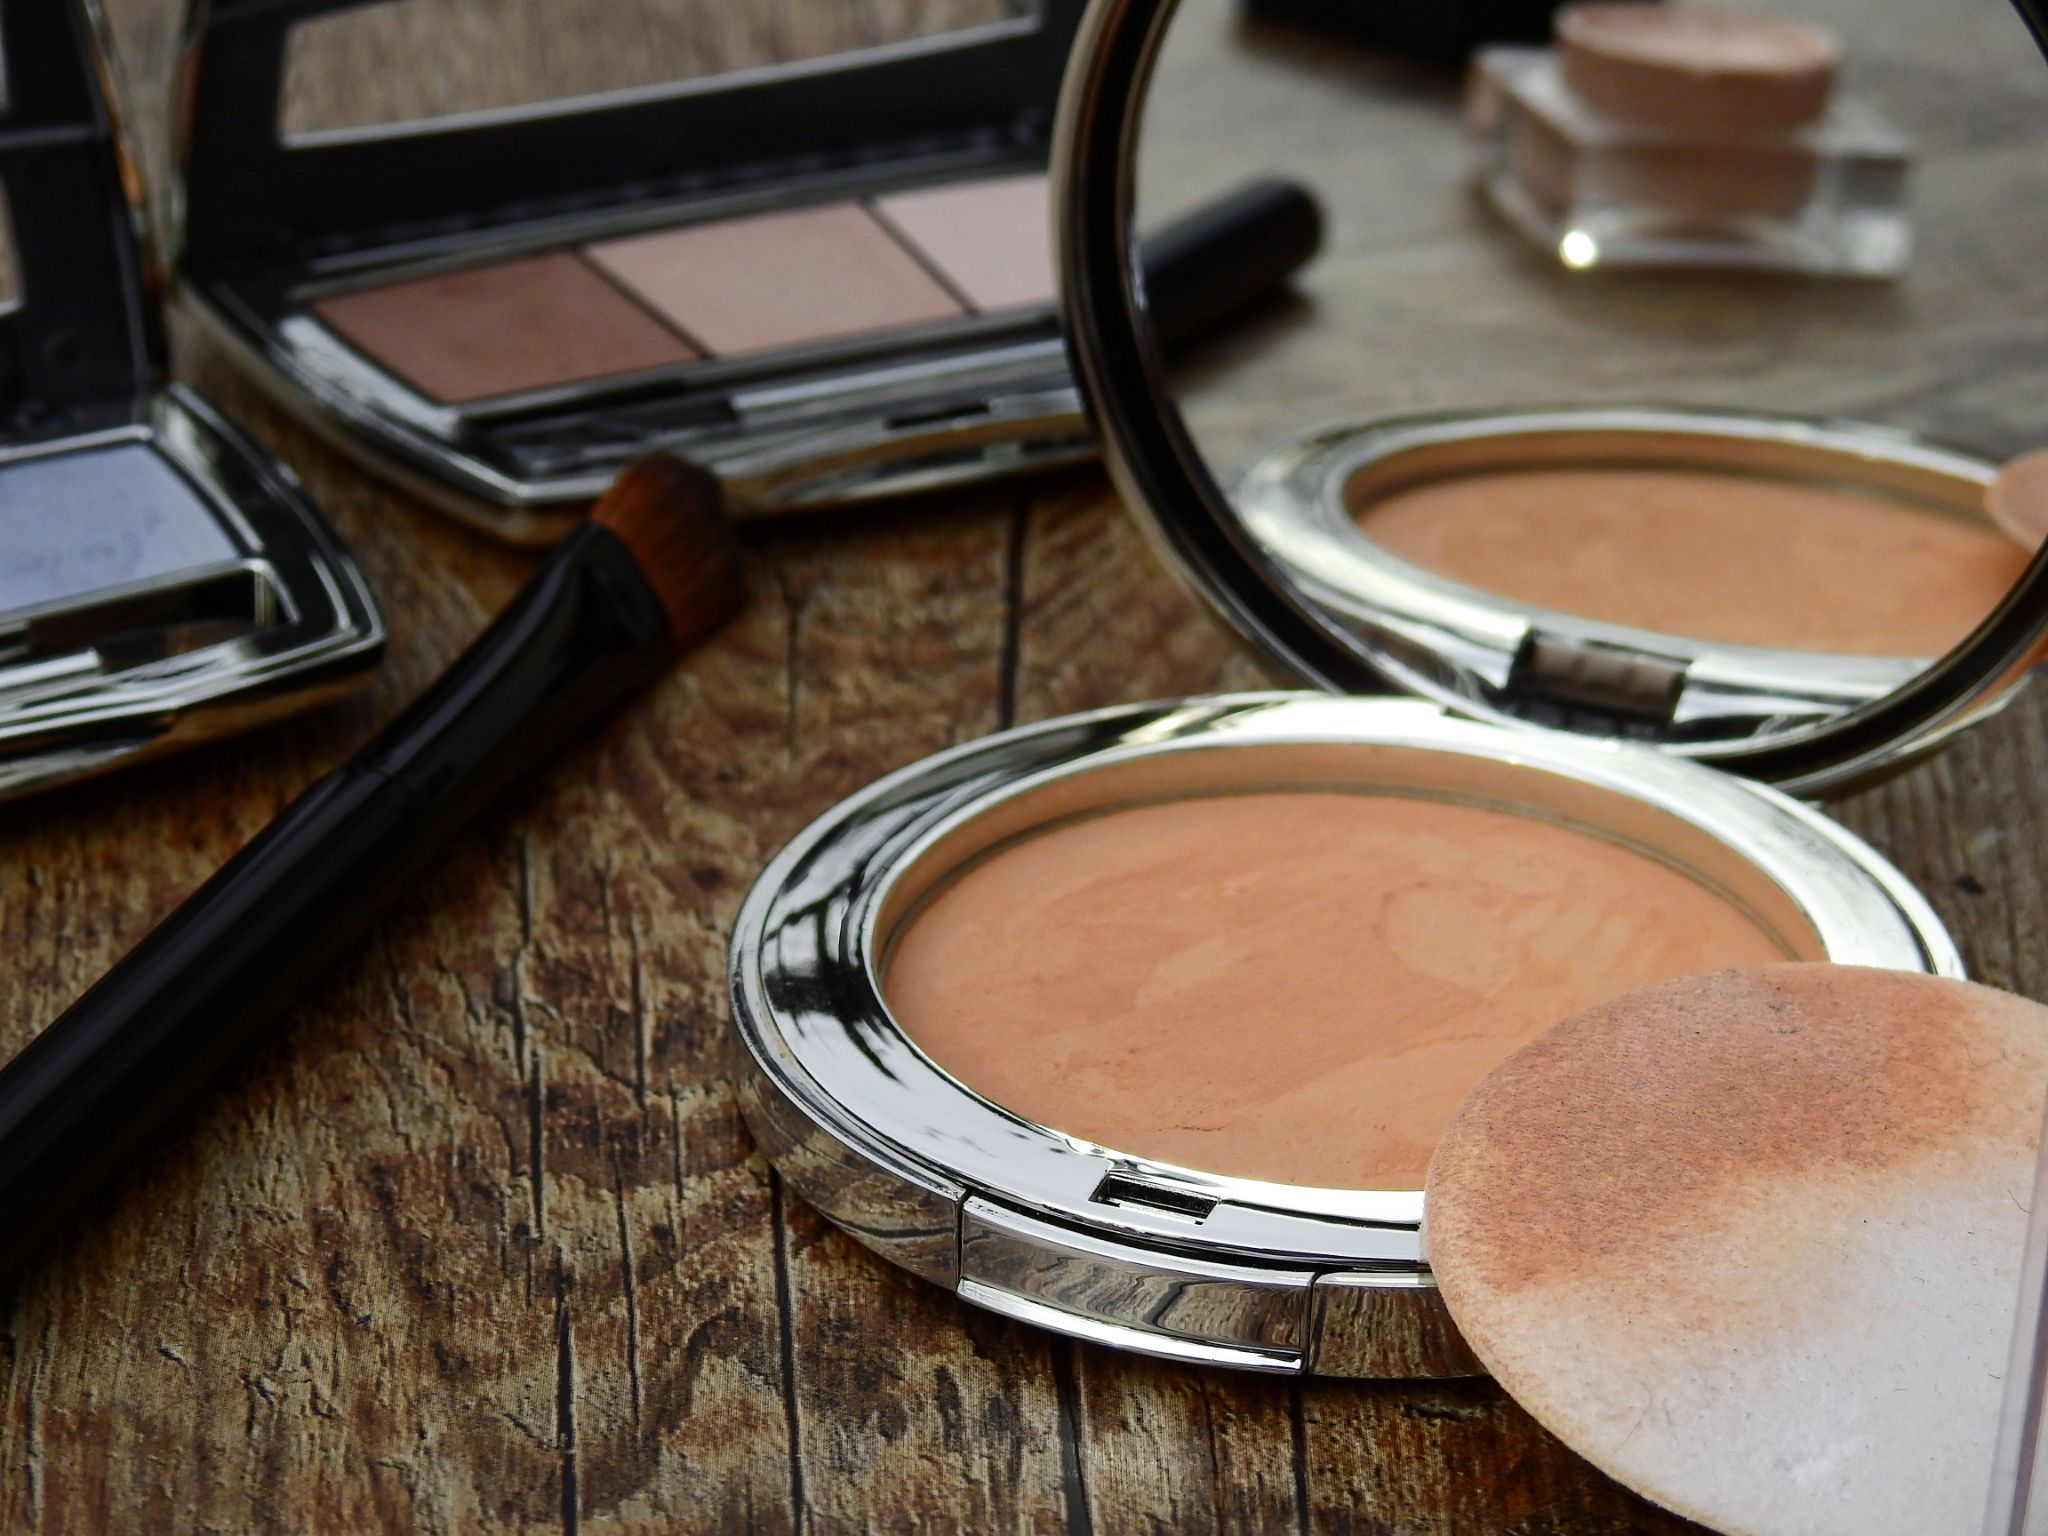  blush and natural makeup products online